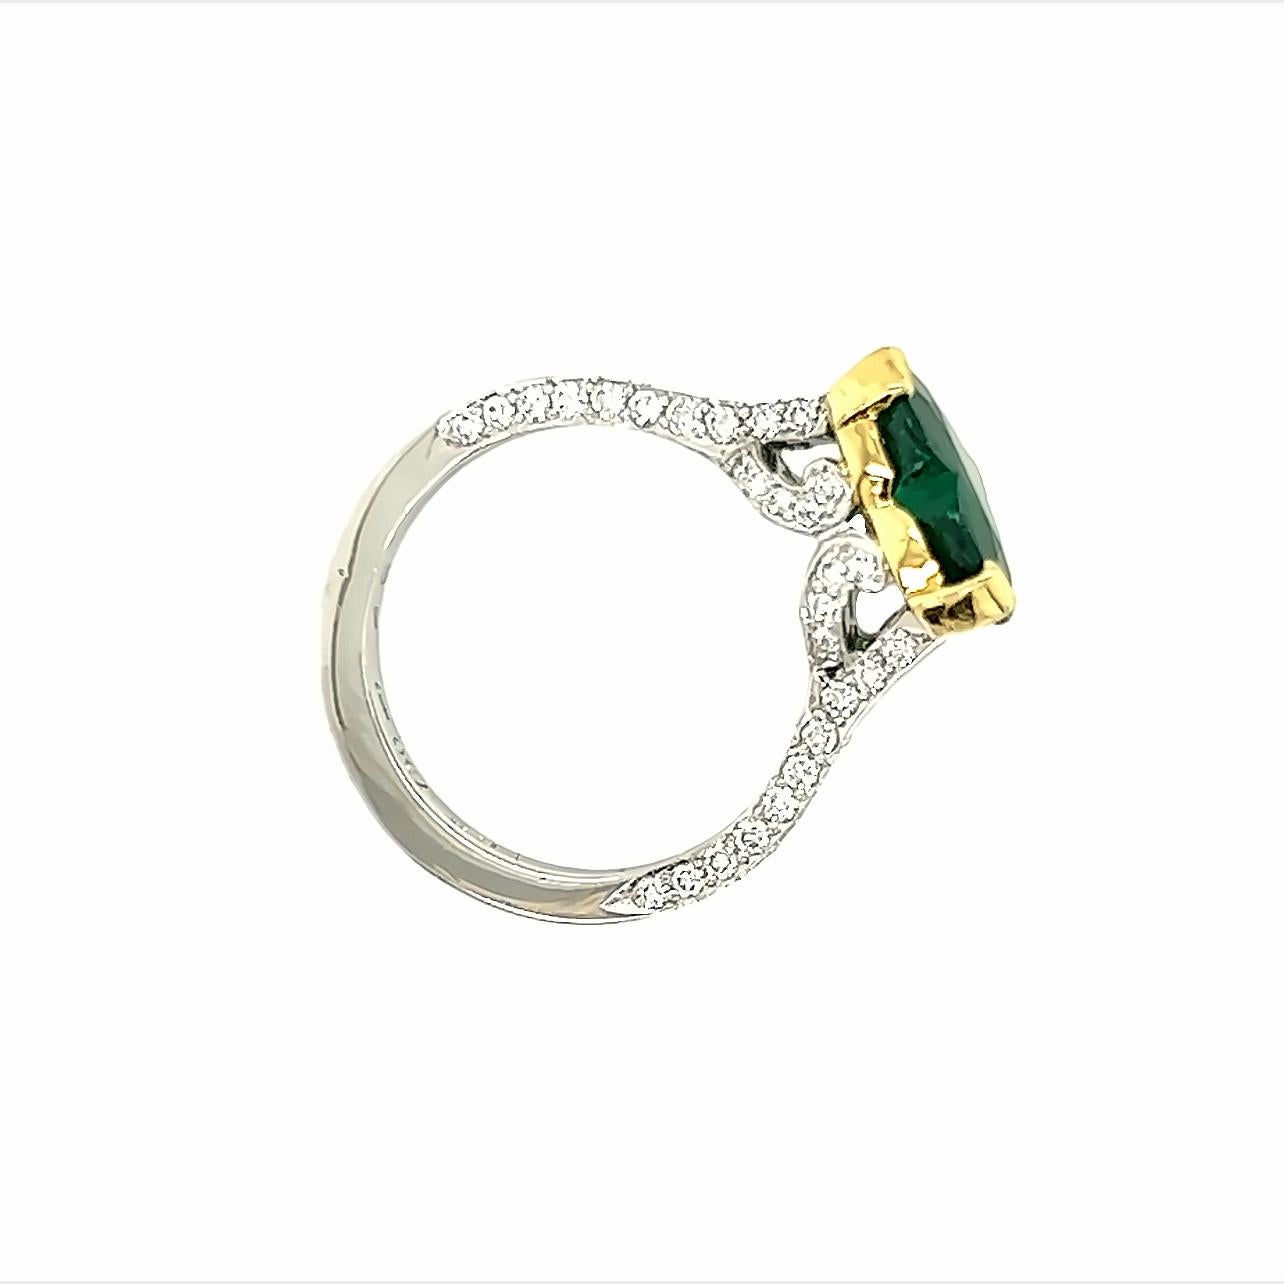 This stunning ring is a true work of art, featuring a beautiful heart-shaped emerald that weighs approximately 2.30 carats. The emerald is set in a gorgeous mounting made of both platinum and 18k yellow gold, which perfectly complements the rich